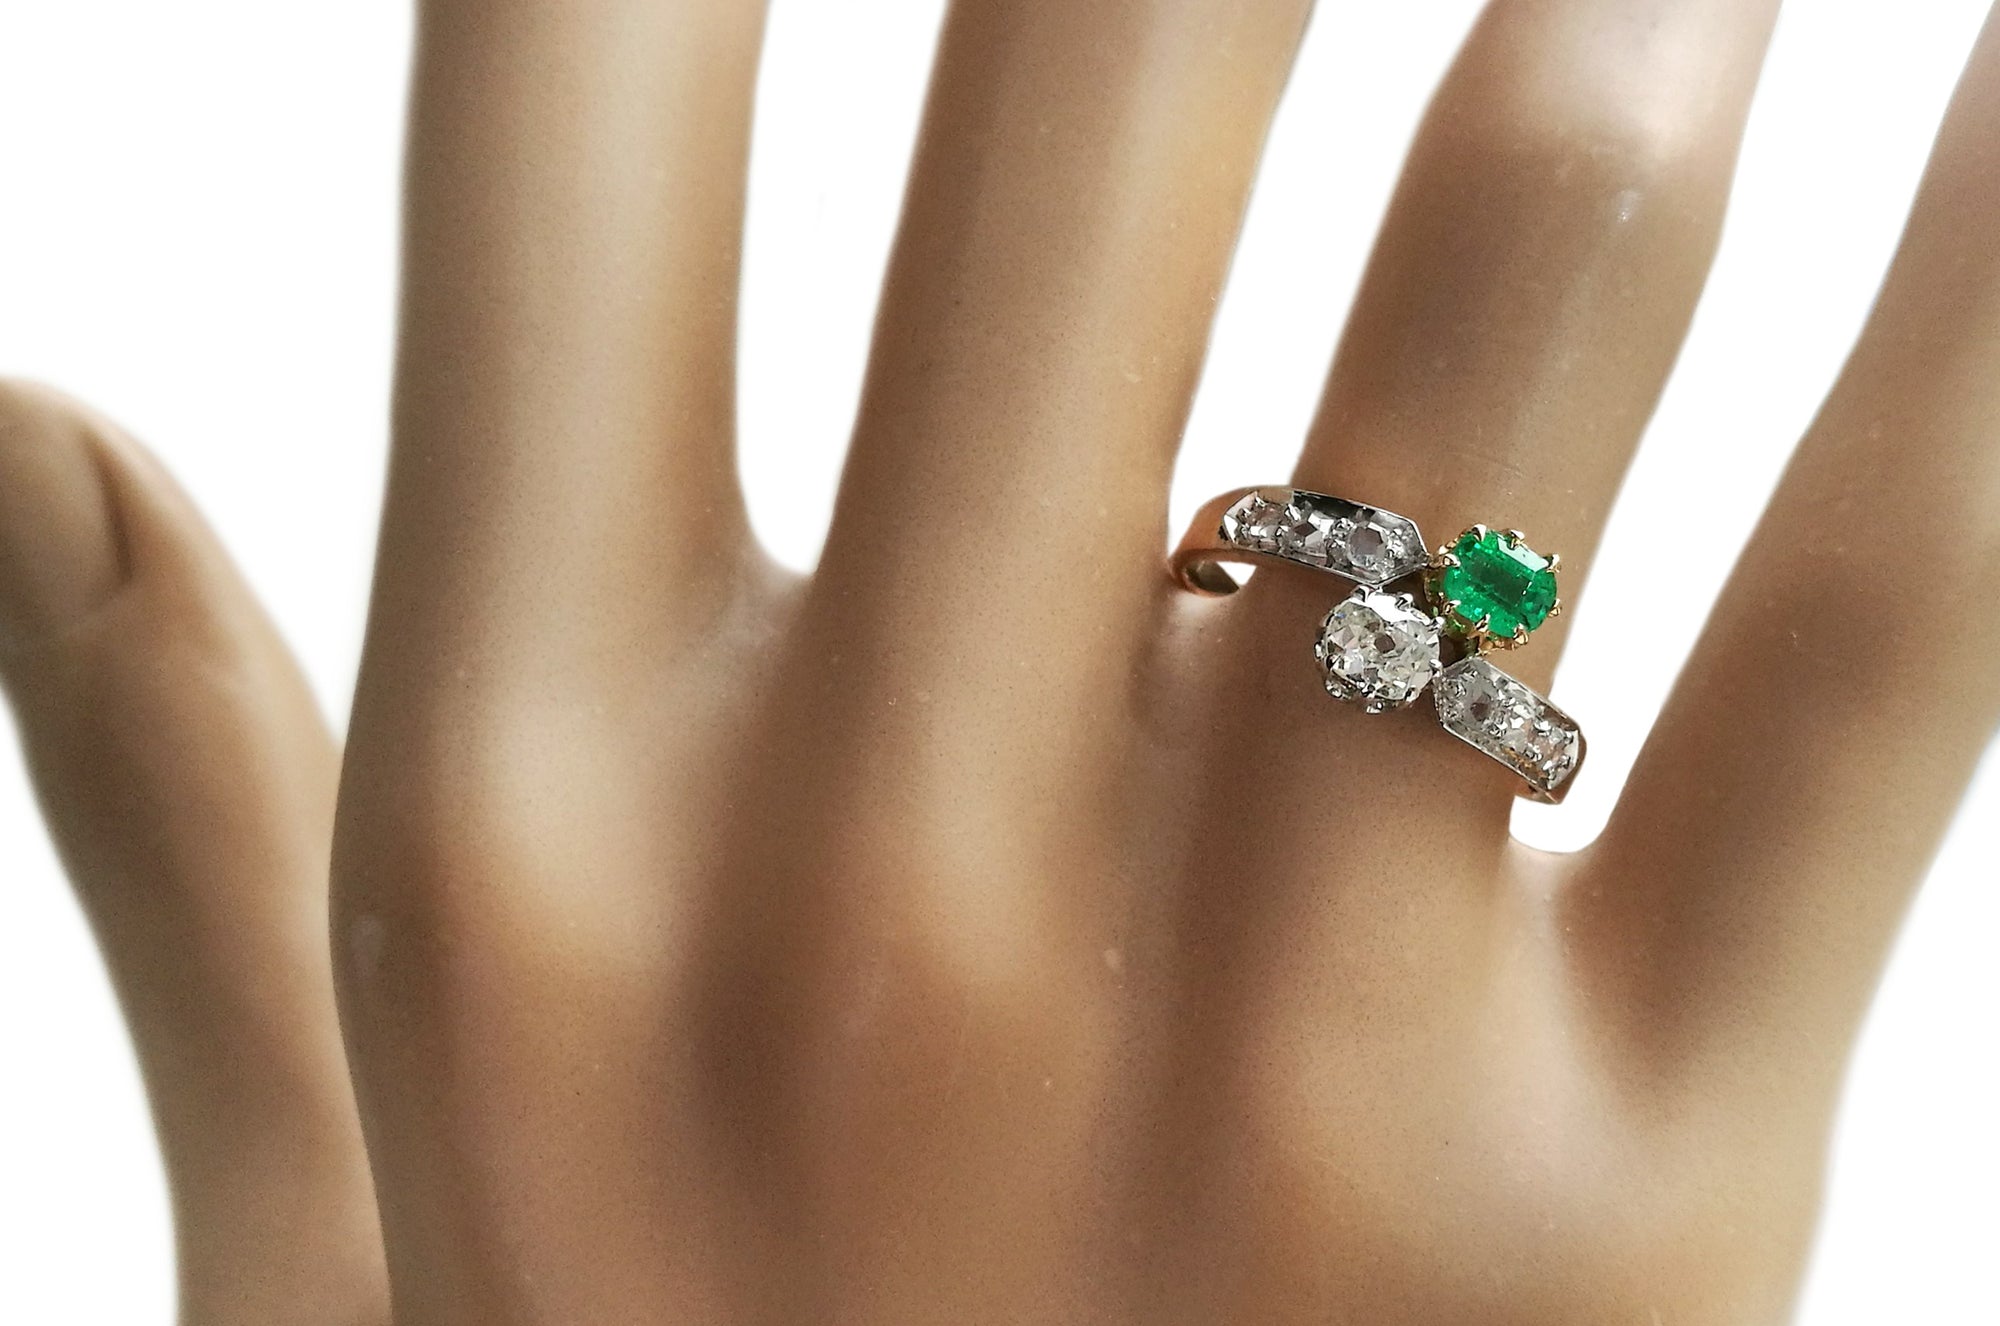 Victorian French Toi et Moi 0.82tcw Diamond & Emerald Engagement Ring in 18k Gold on hand